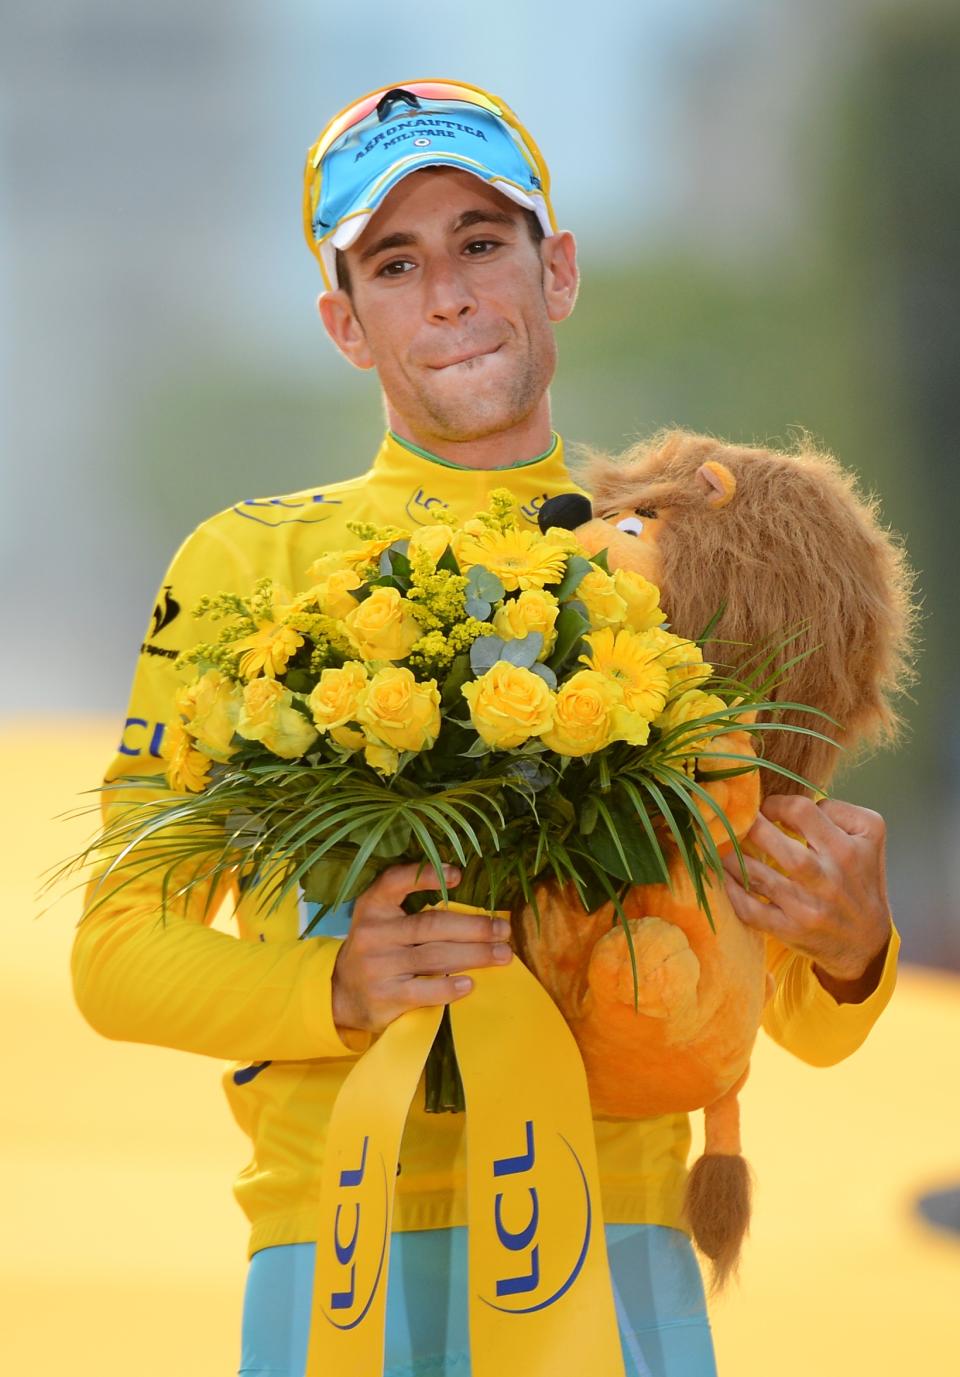 Race winner Vincenzo Nibali of Italy, wearing the overall leader's yellow jersey, celebrates on the podium of the Tour de France in Paris, France, Sunday, July 27, 2014. (AP Photo/Jerome Prevost, Pool)